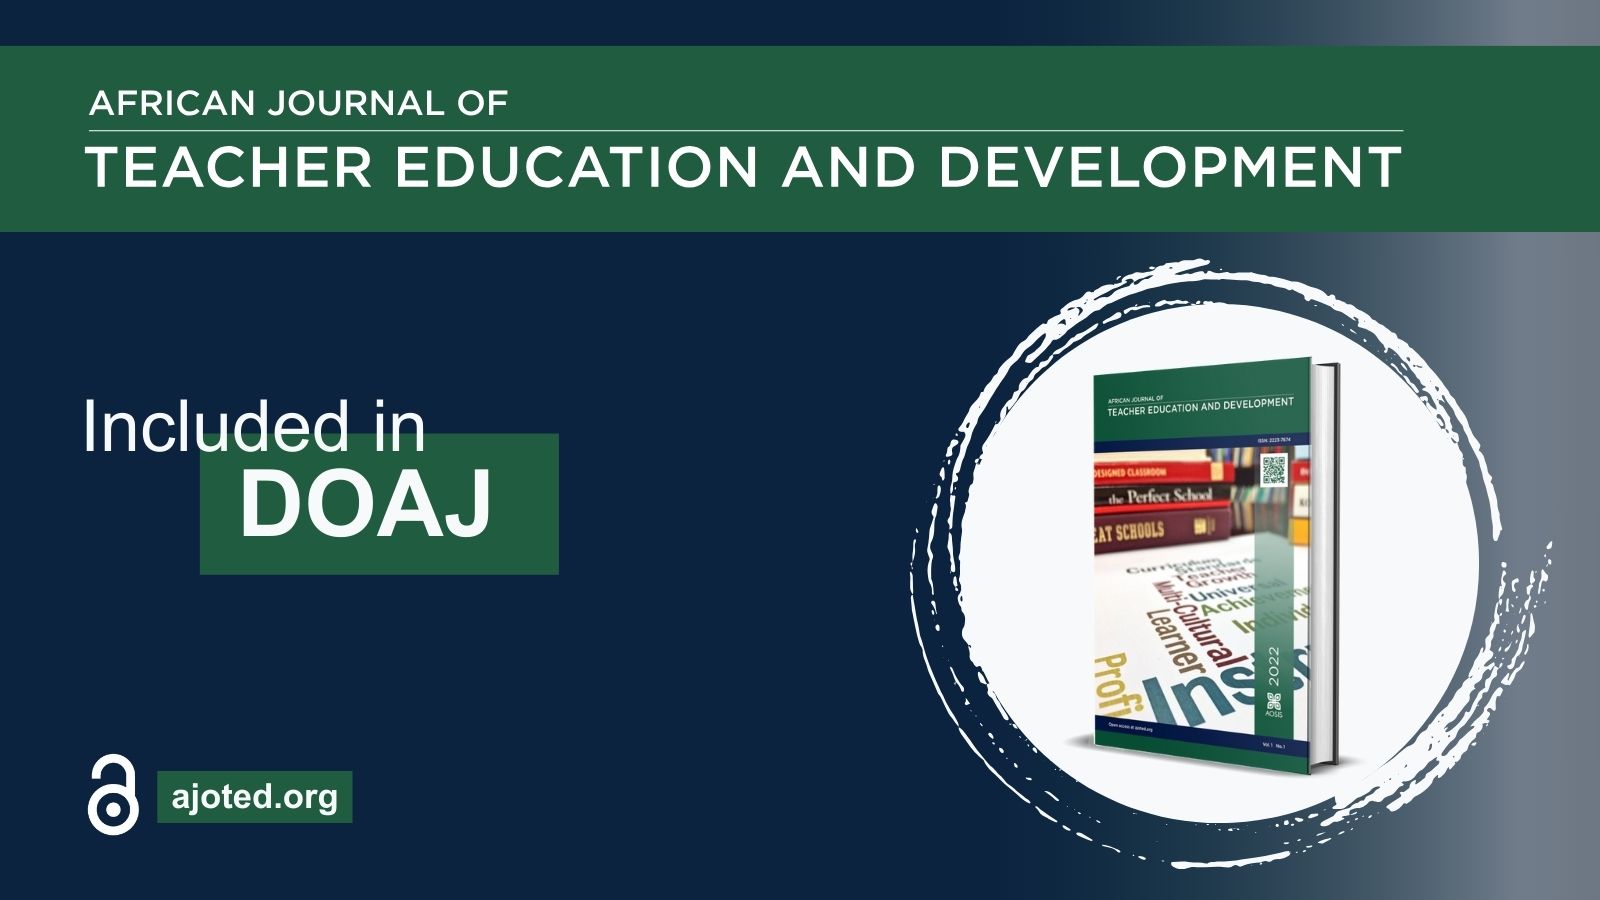 DOAJ includes the African Journal of Teacher Education and Development